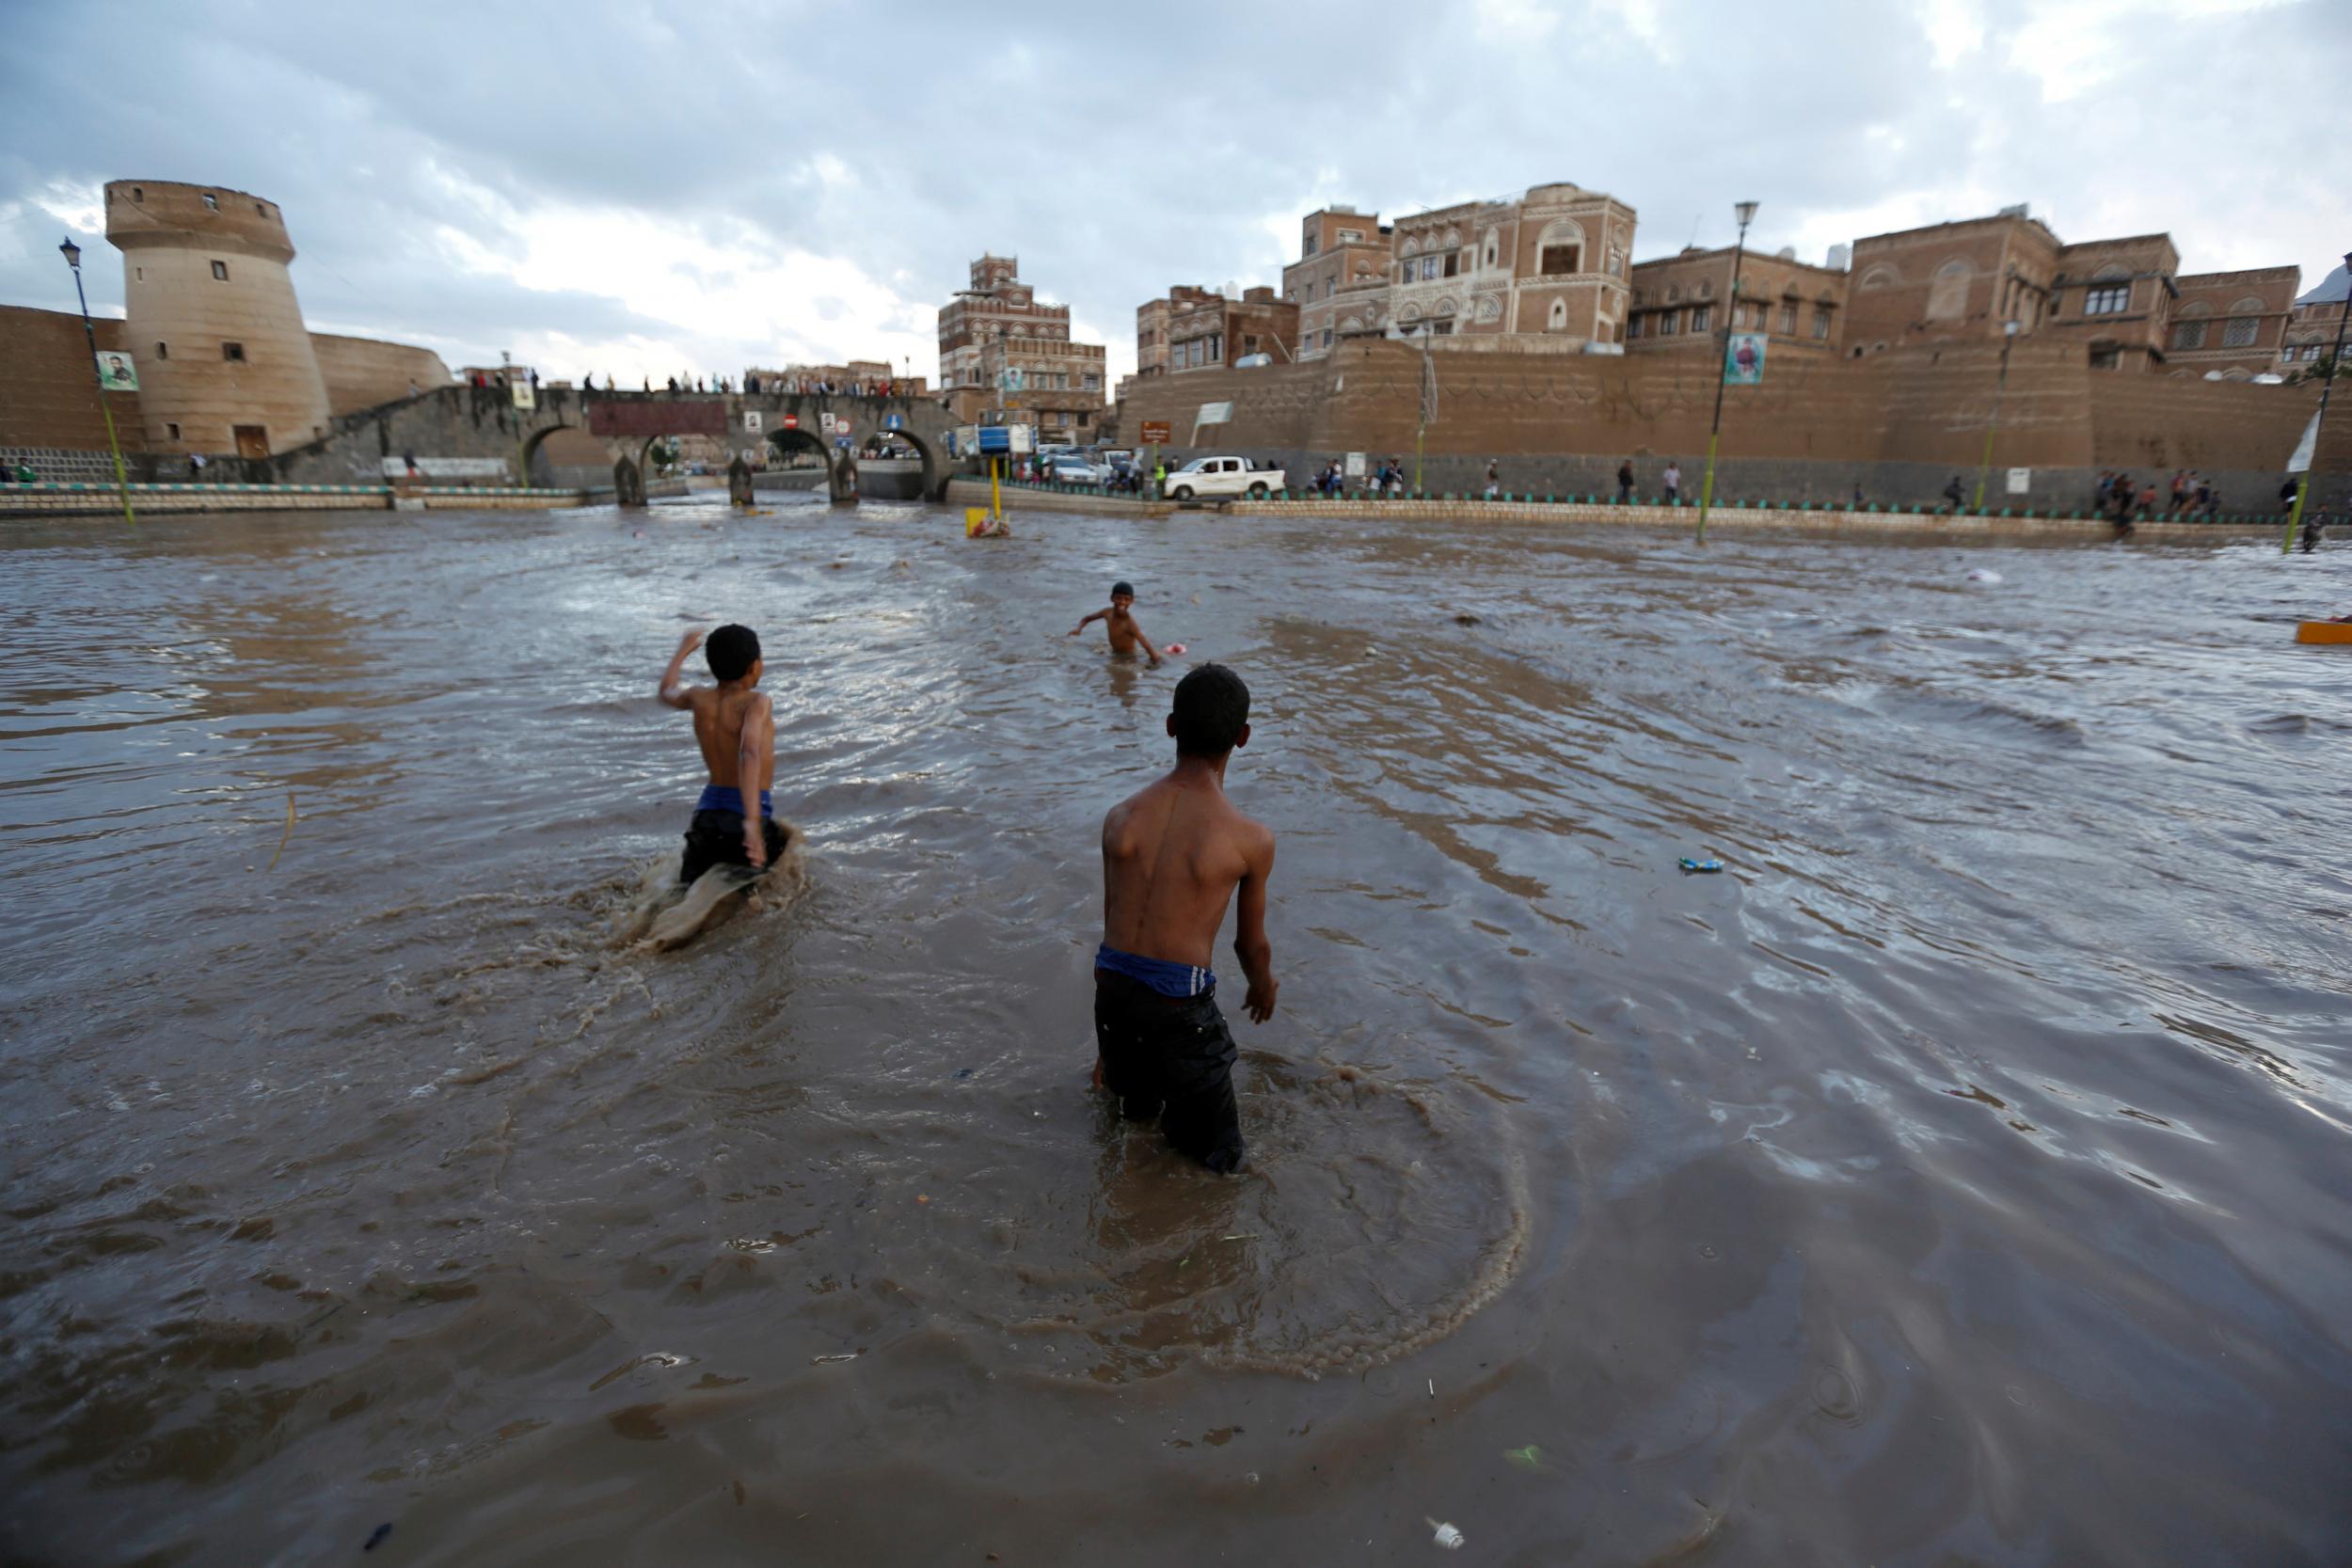 Boys play in flood water in the Old City of Sanaa, Yemen in this file photo from 2 August 2016